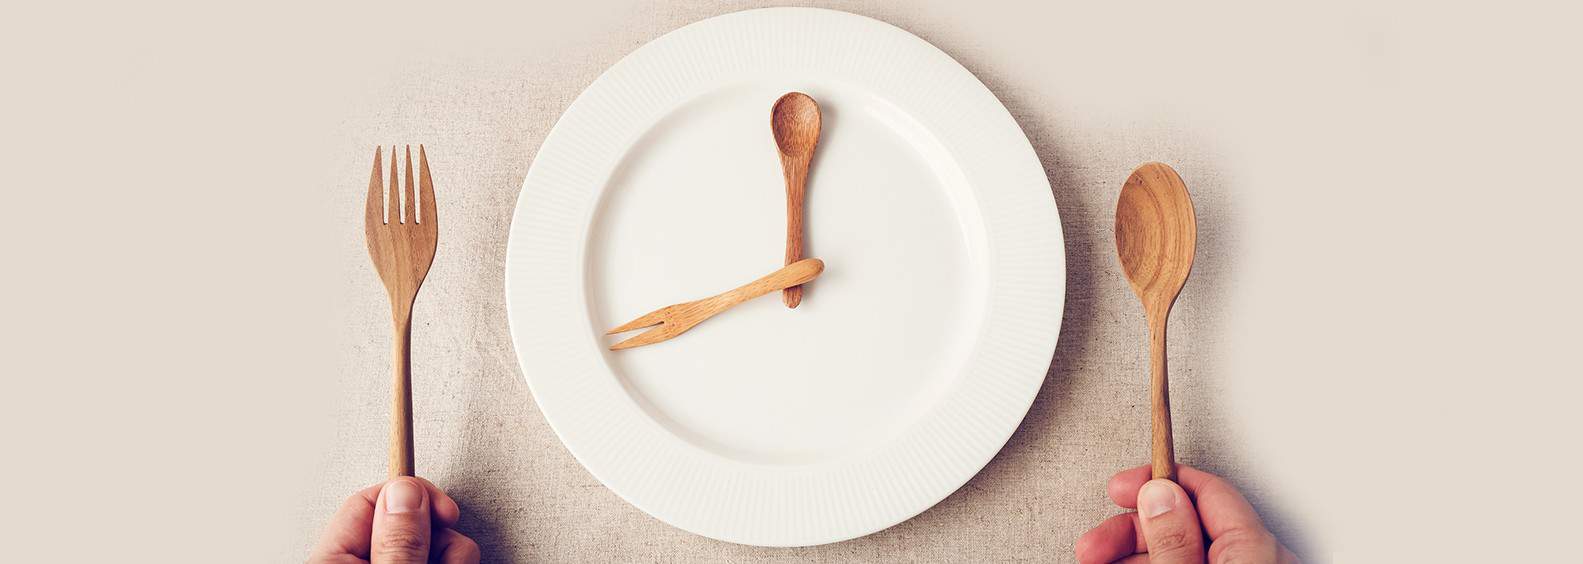 Intermittent Fasting: Risks And Benefits